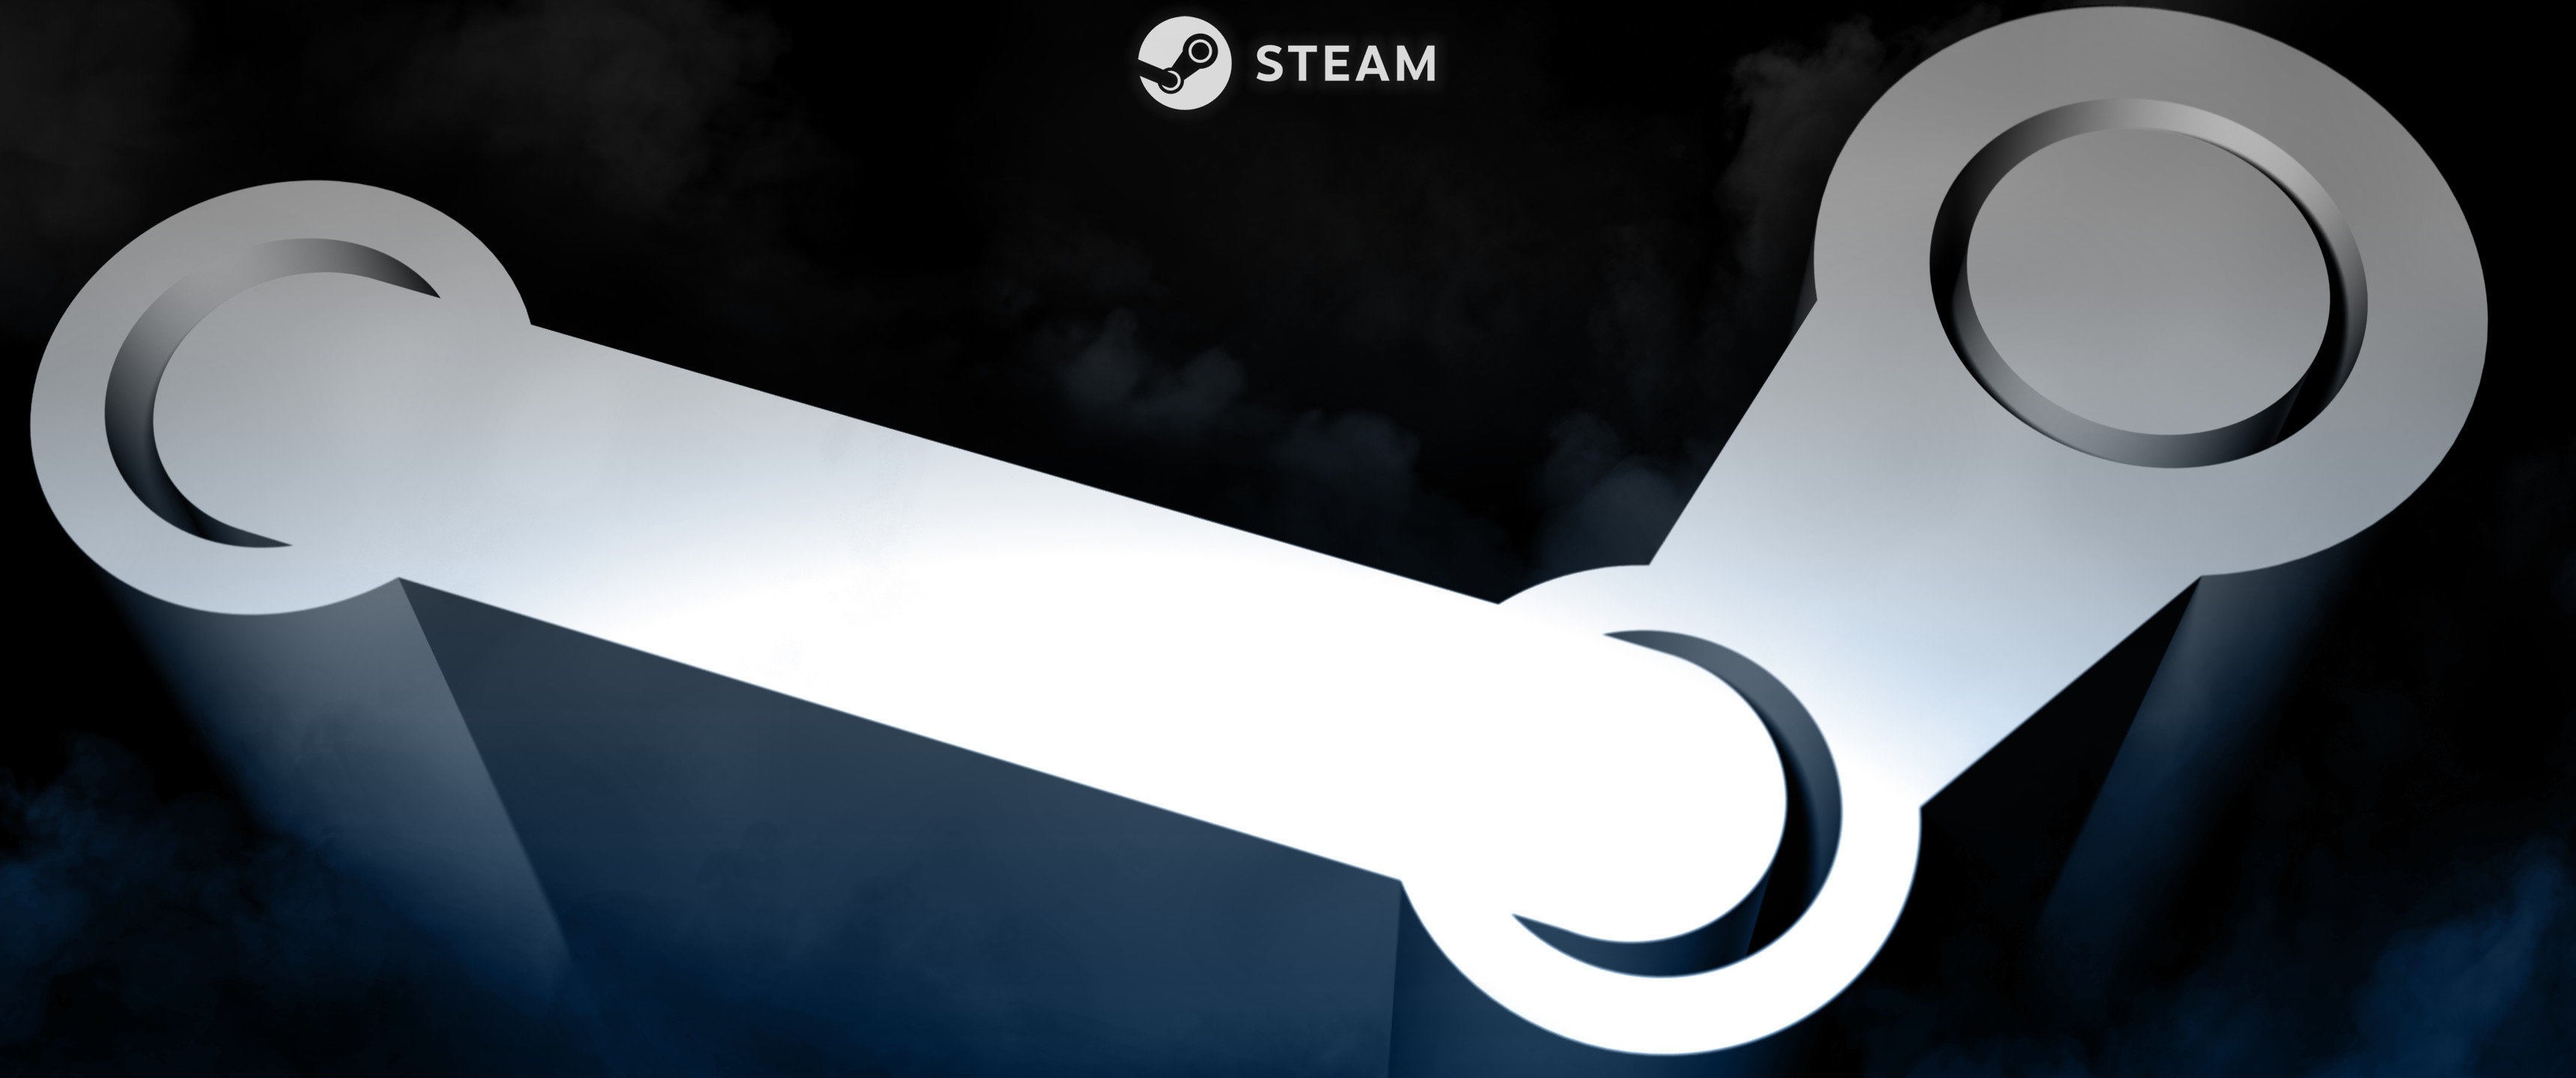 Steam: The service is the largest digital distribution platform for PC gaming. 3440x1440 Dual Screen Wallpaper.